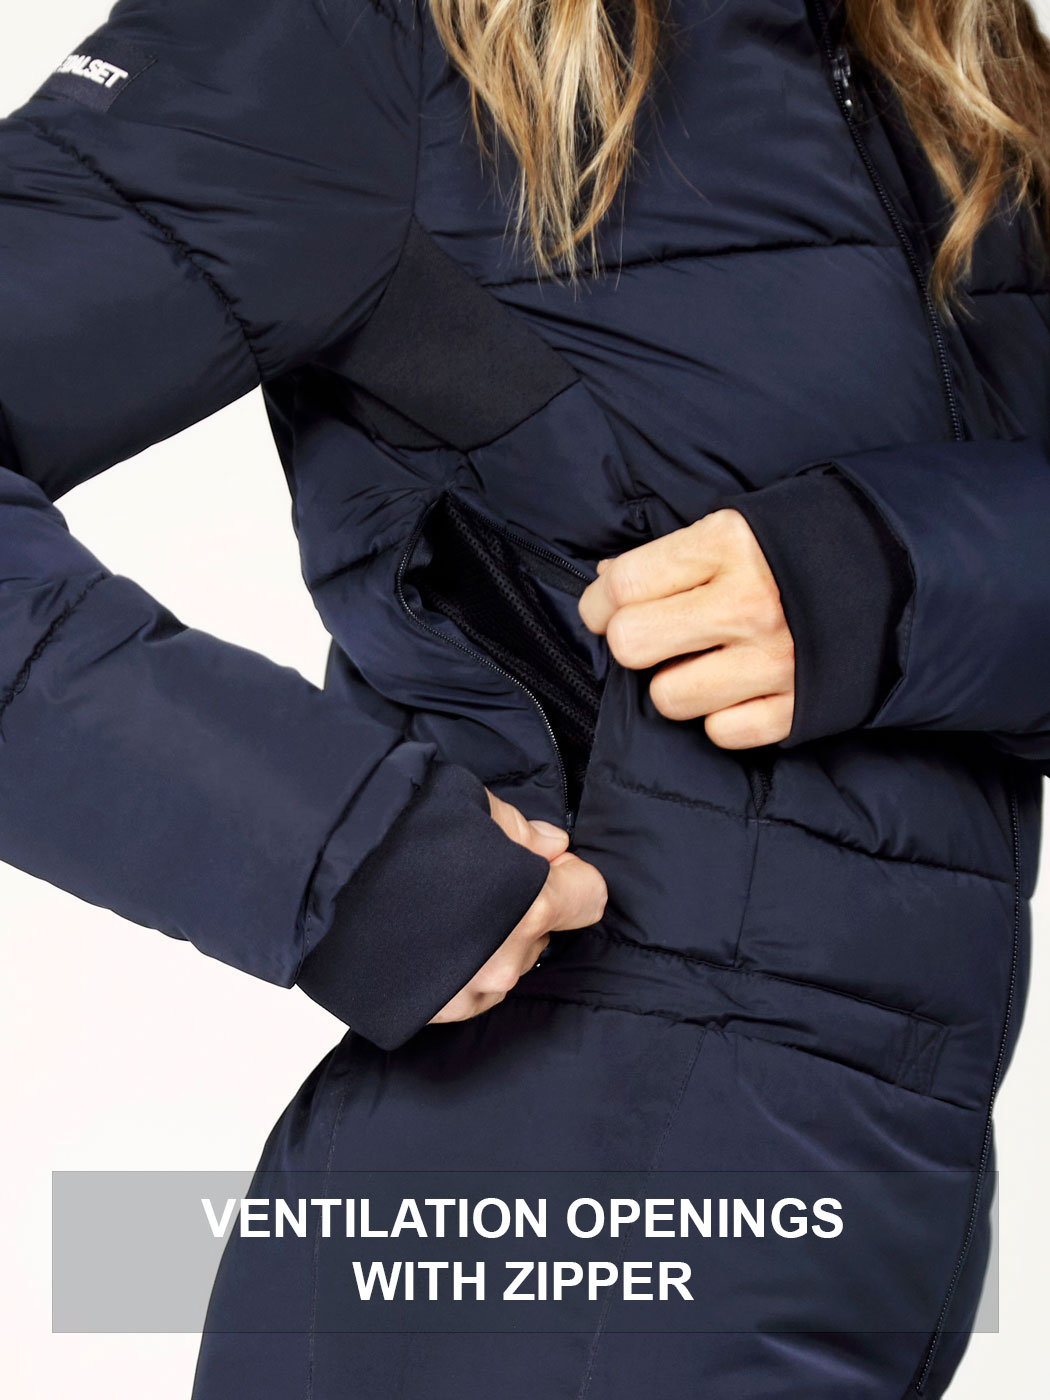 Onepiece-ventilation-openings-blue-The-Dalset